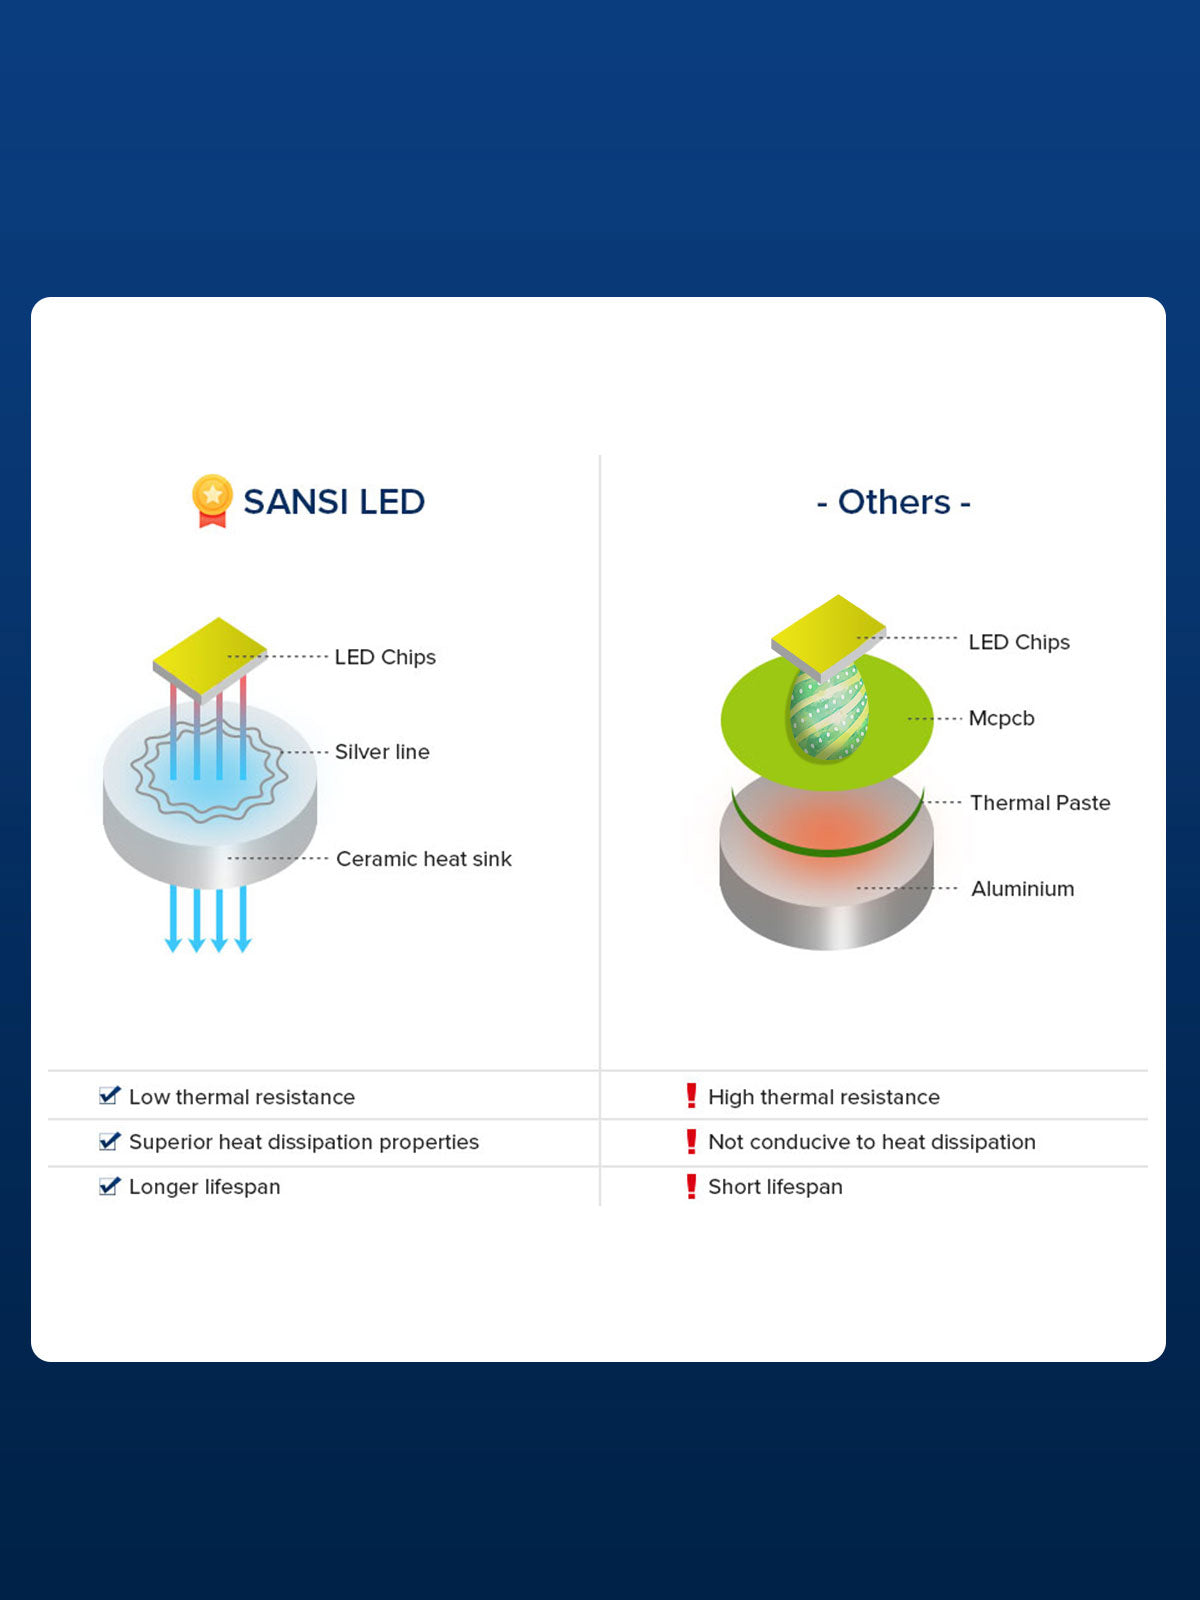 All the SANSI lightings are adopted SANSI Patented Ceramic Technology. High-quality ceramics at a high temperature of 1600°C are used as the heat sink, which makes up for the hidden hazard of traditional aluminum substrate leakage. Excellent ceramic sealed lens technology ensures excellent heat dissipation and long-lasting performance.